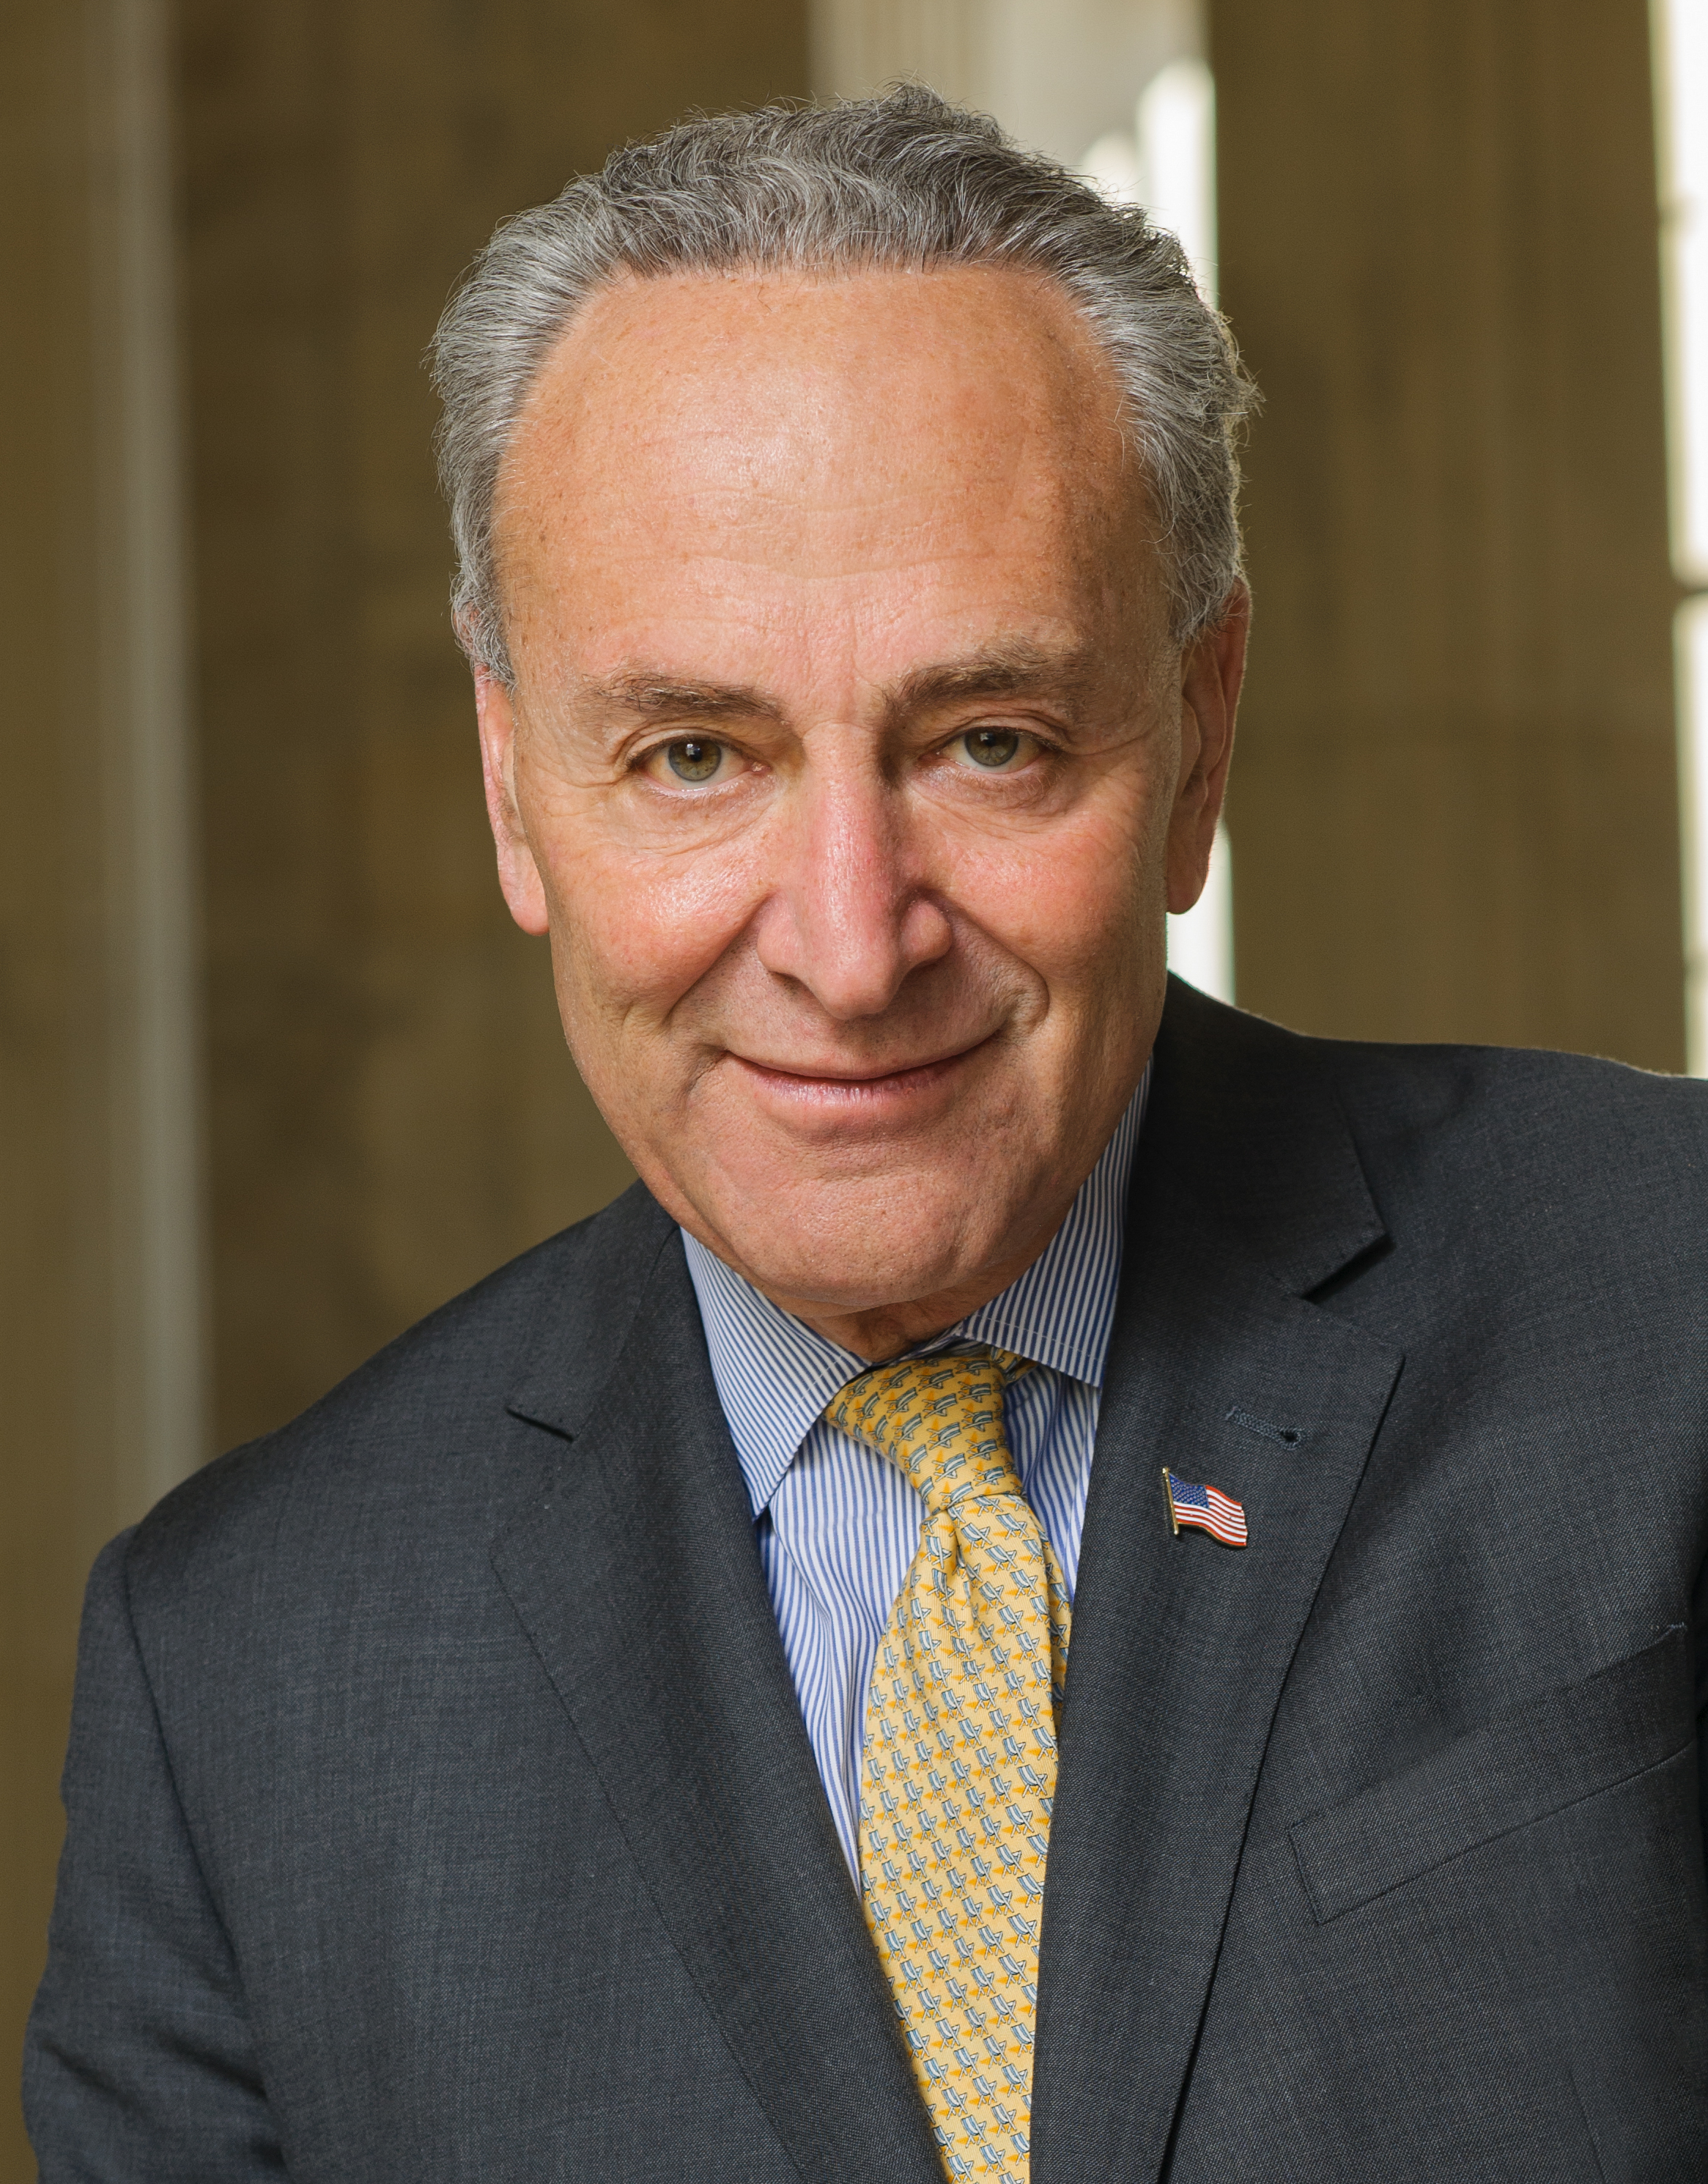 NABPAC supported Sen. Chuck Schumer (NY) with an in-person fundraiser.